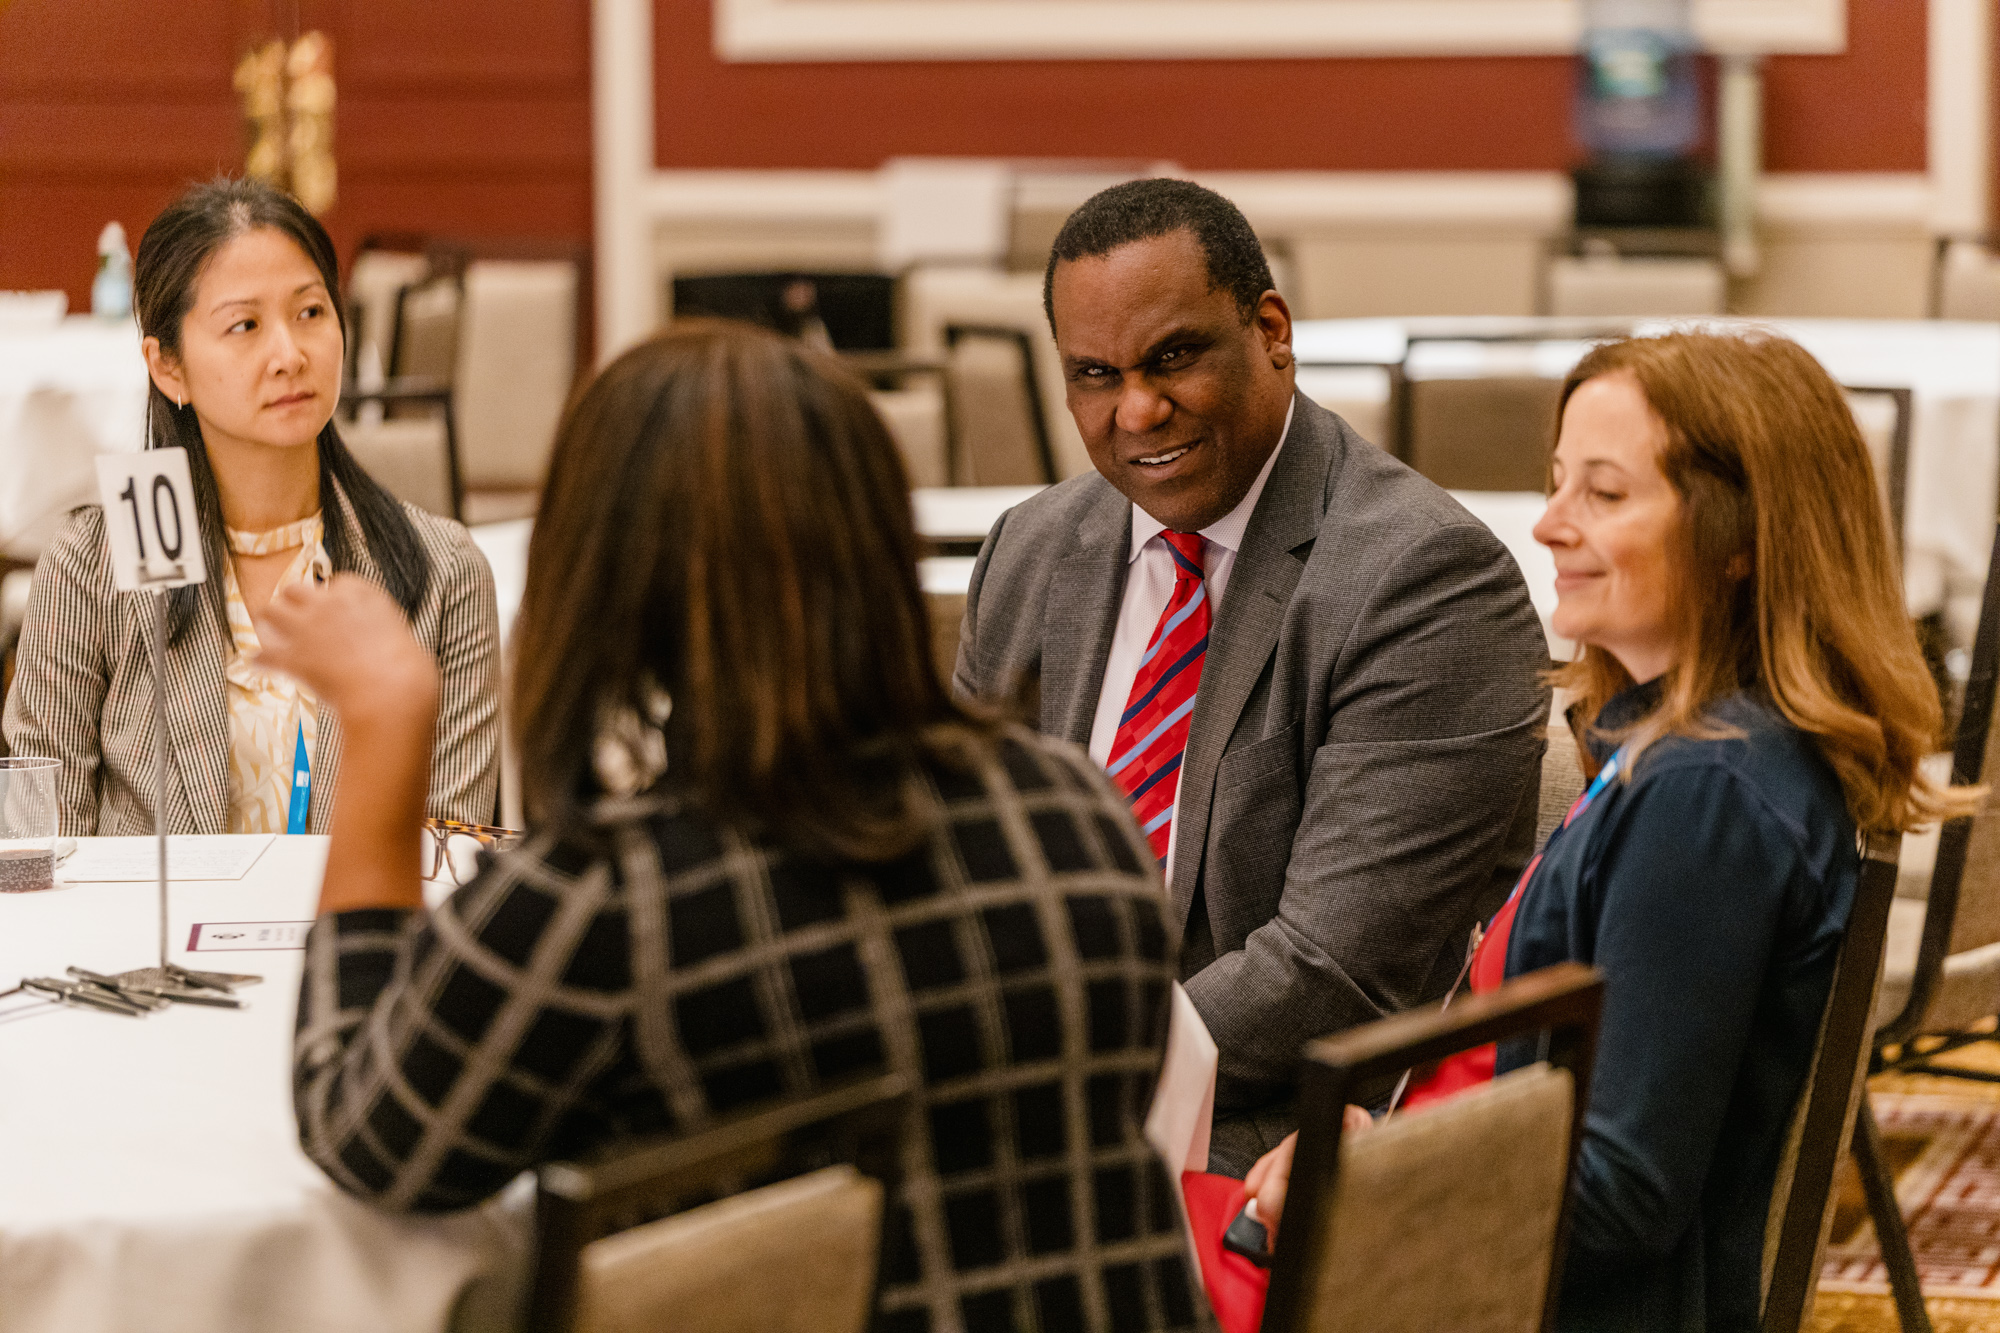 One man and three women having a conversation at a table during a conference